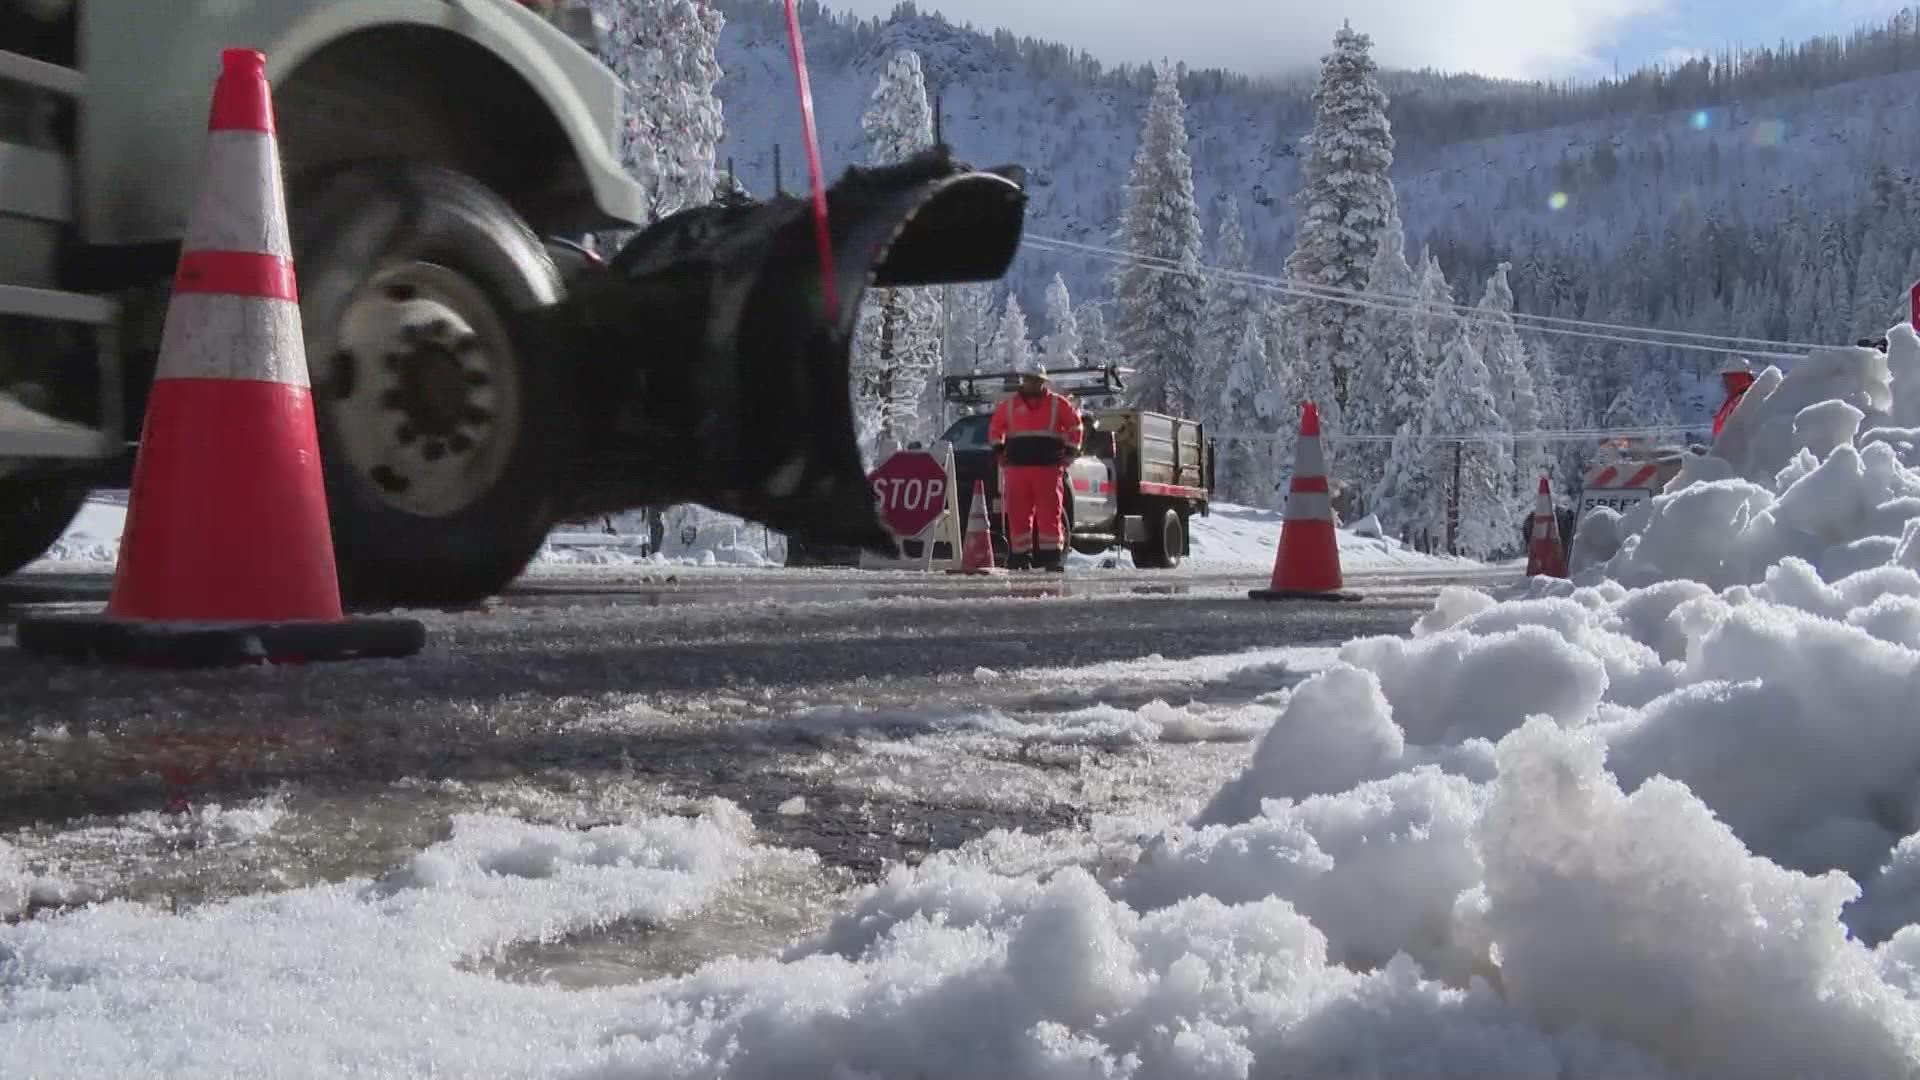 Some parts of the Sierra are forecasted to get 4 to 6.5-feet of snow over the weekend